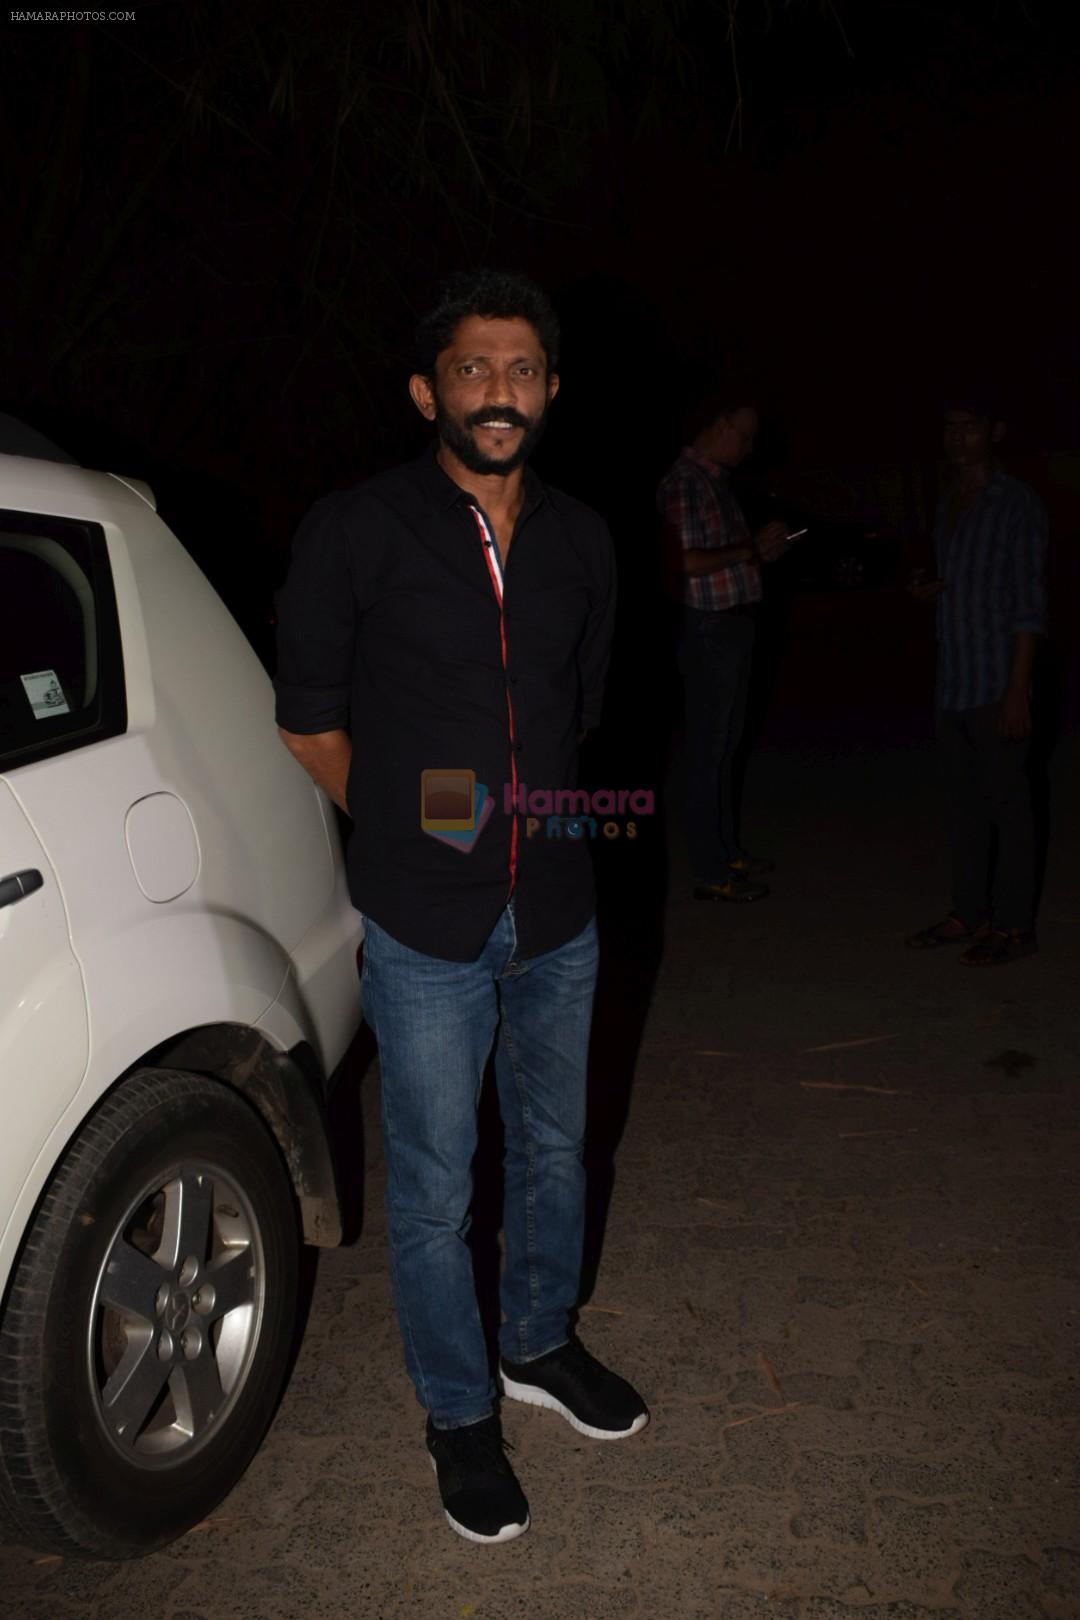 Shoojit Sircar at the screening of Bhavesh Joshi Superhero in sunny super sound on 31st May 2018